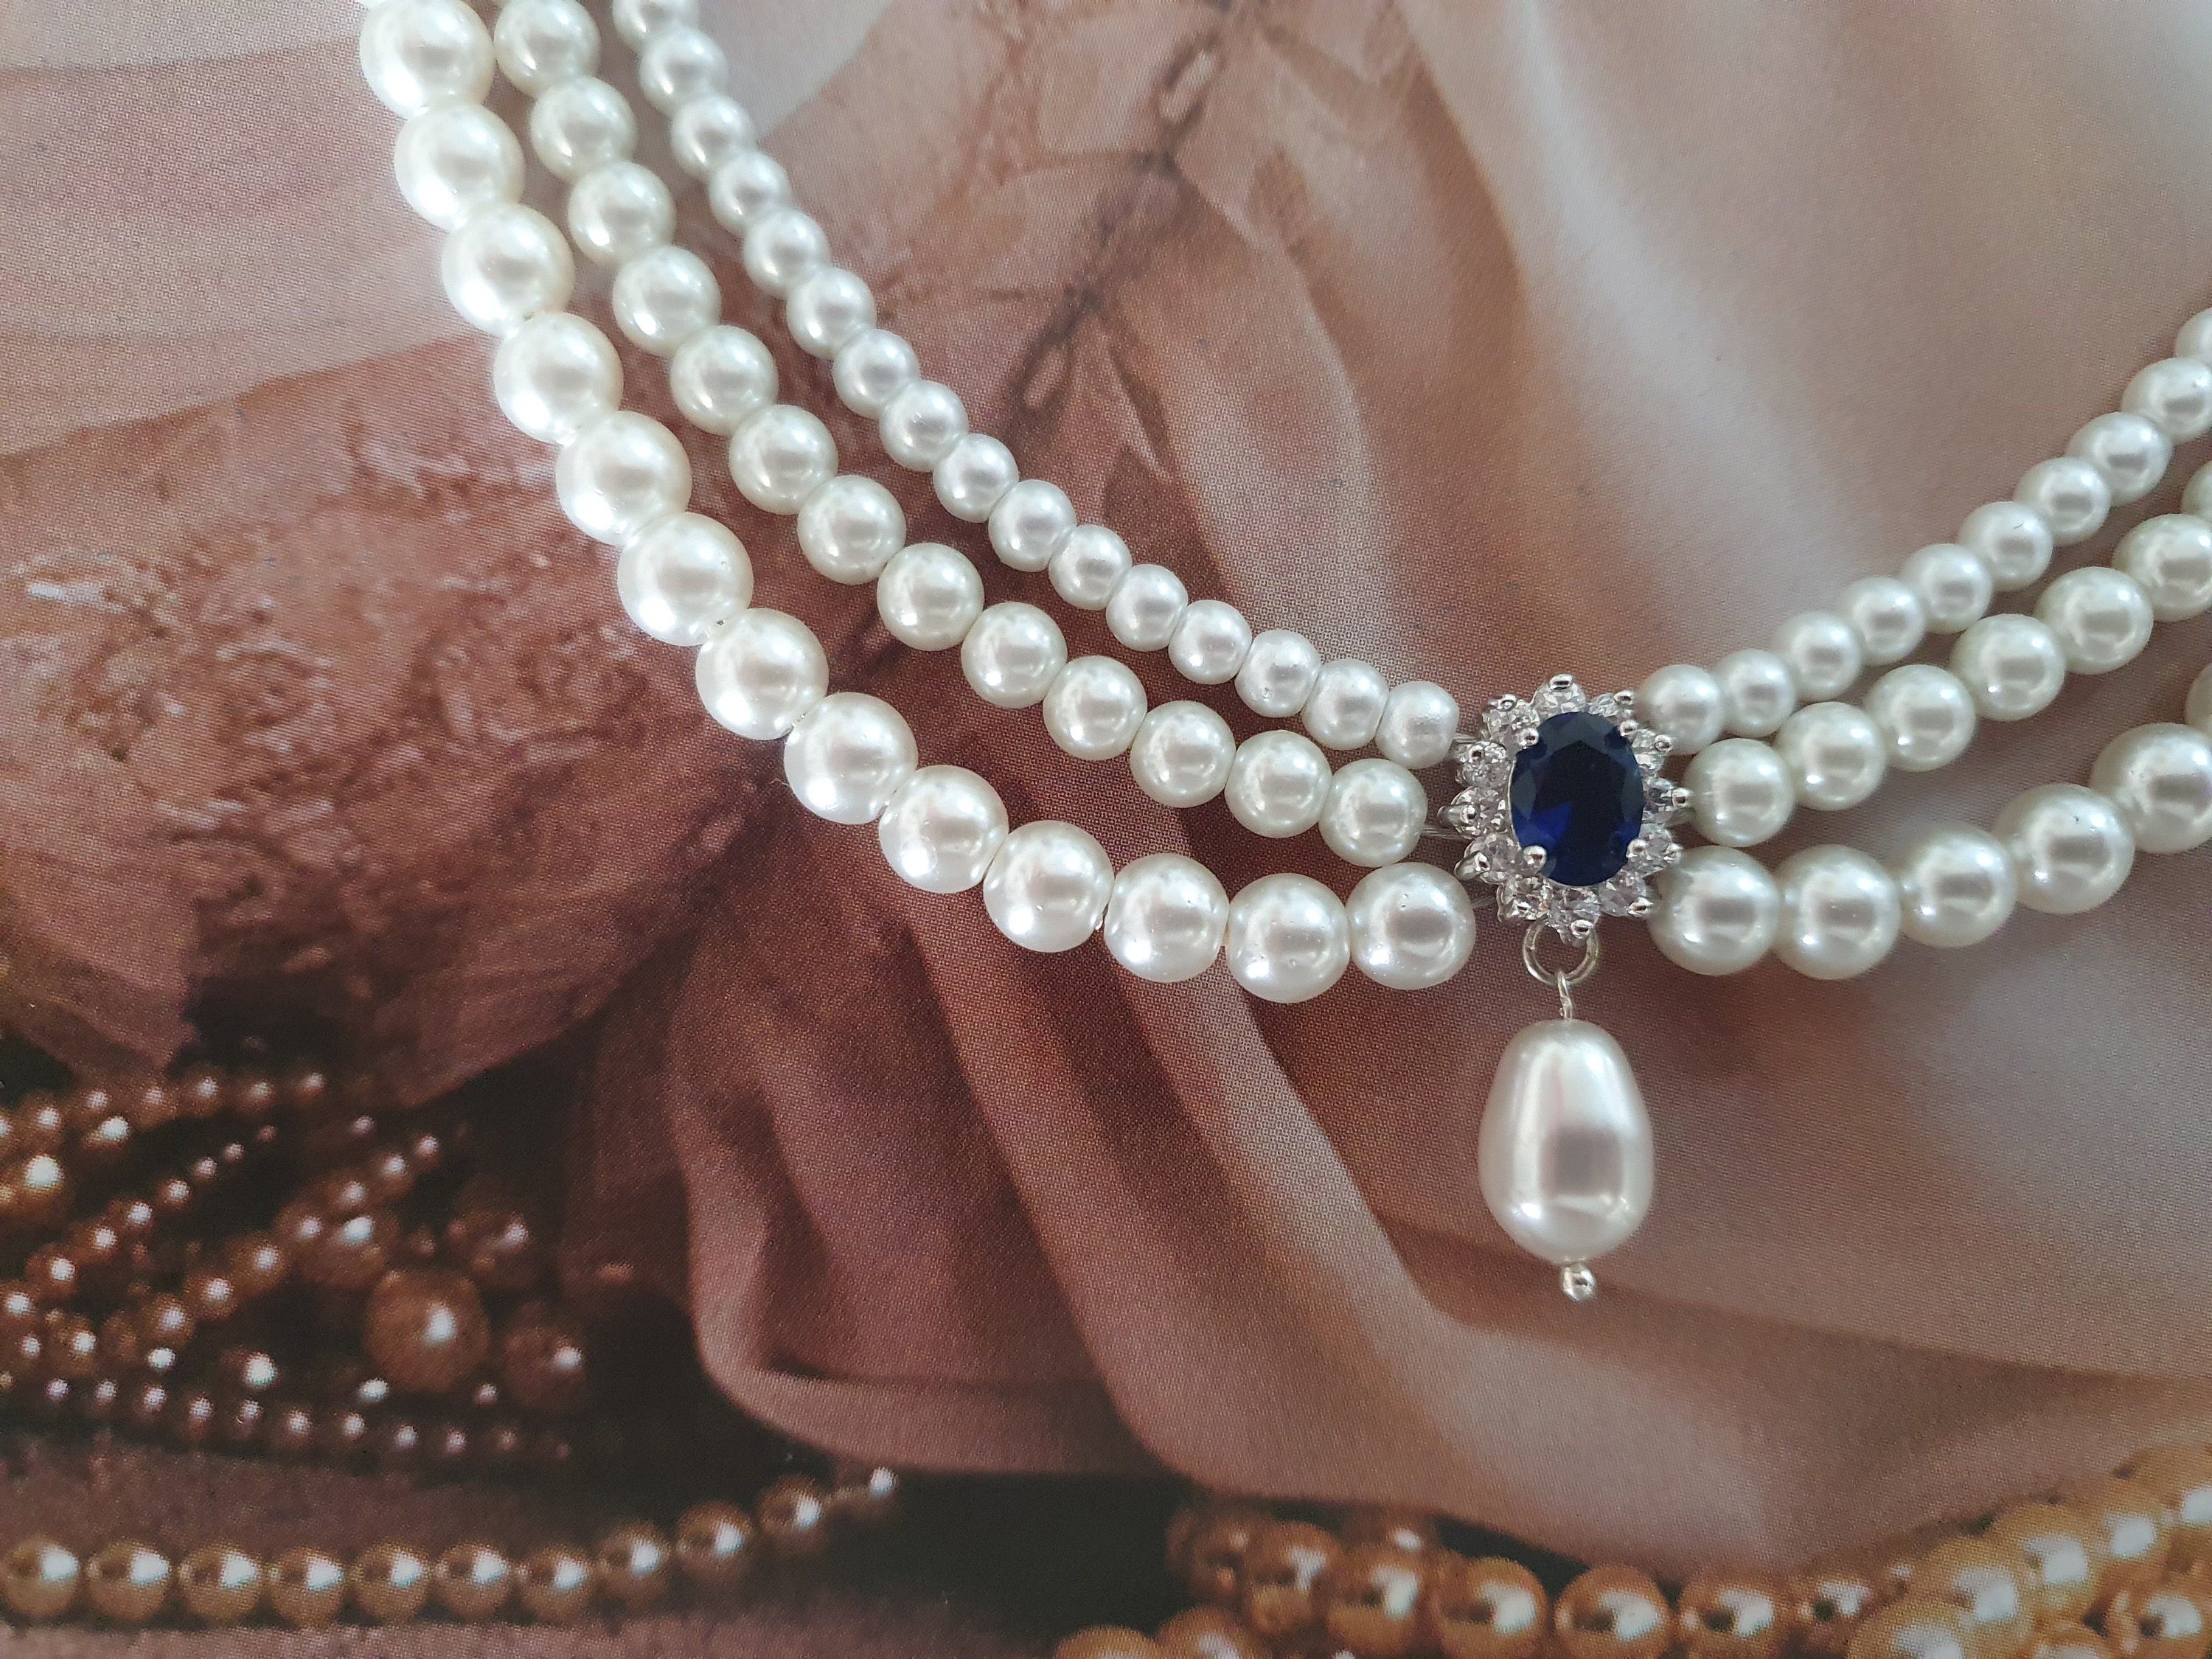 Wedding Necklace Pearls and Sapphire Blue Stone Ivory White Pearls Necklace Bridal Drop Pearl Vintage Style Silver Necklace Sapphire Choker